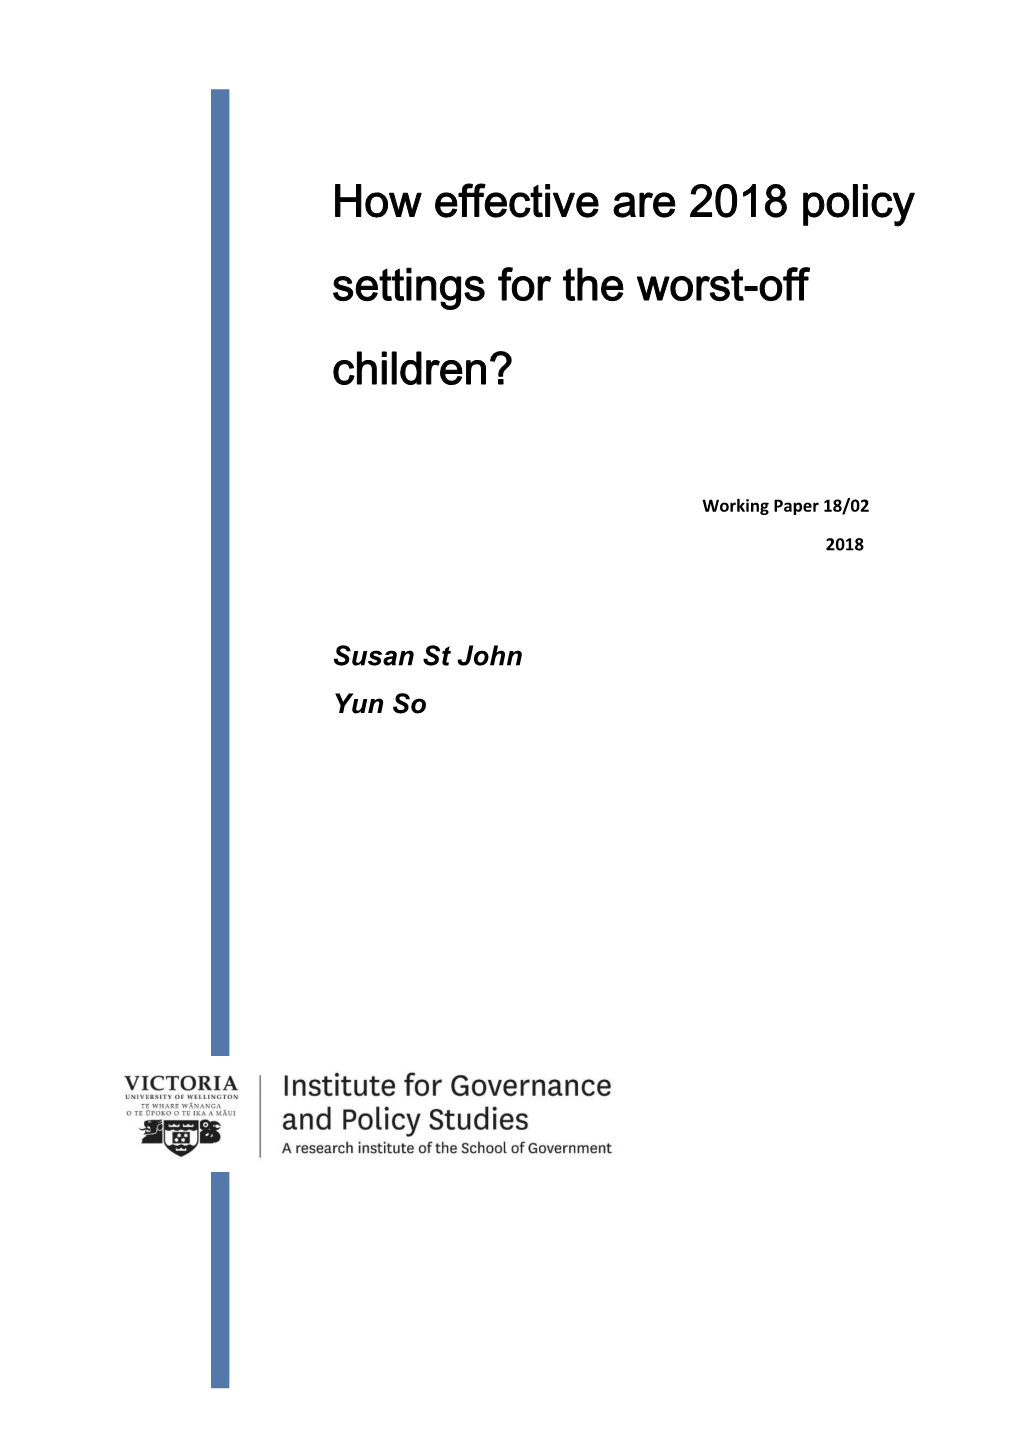 How Effective Are 2018 Policy Settings for the Worst-Off Children?